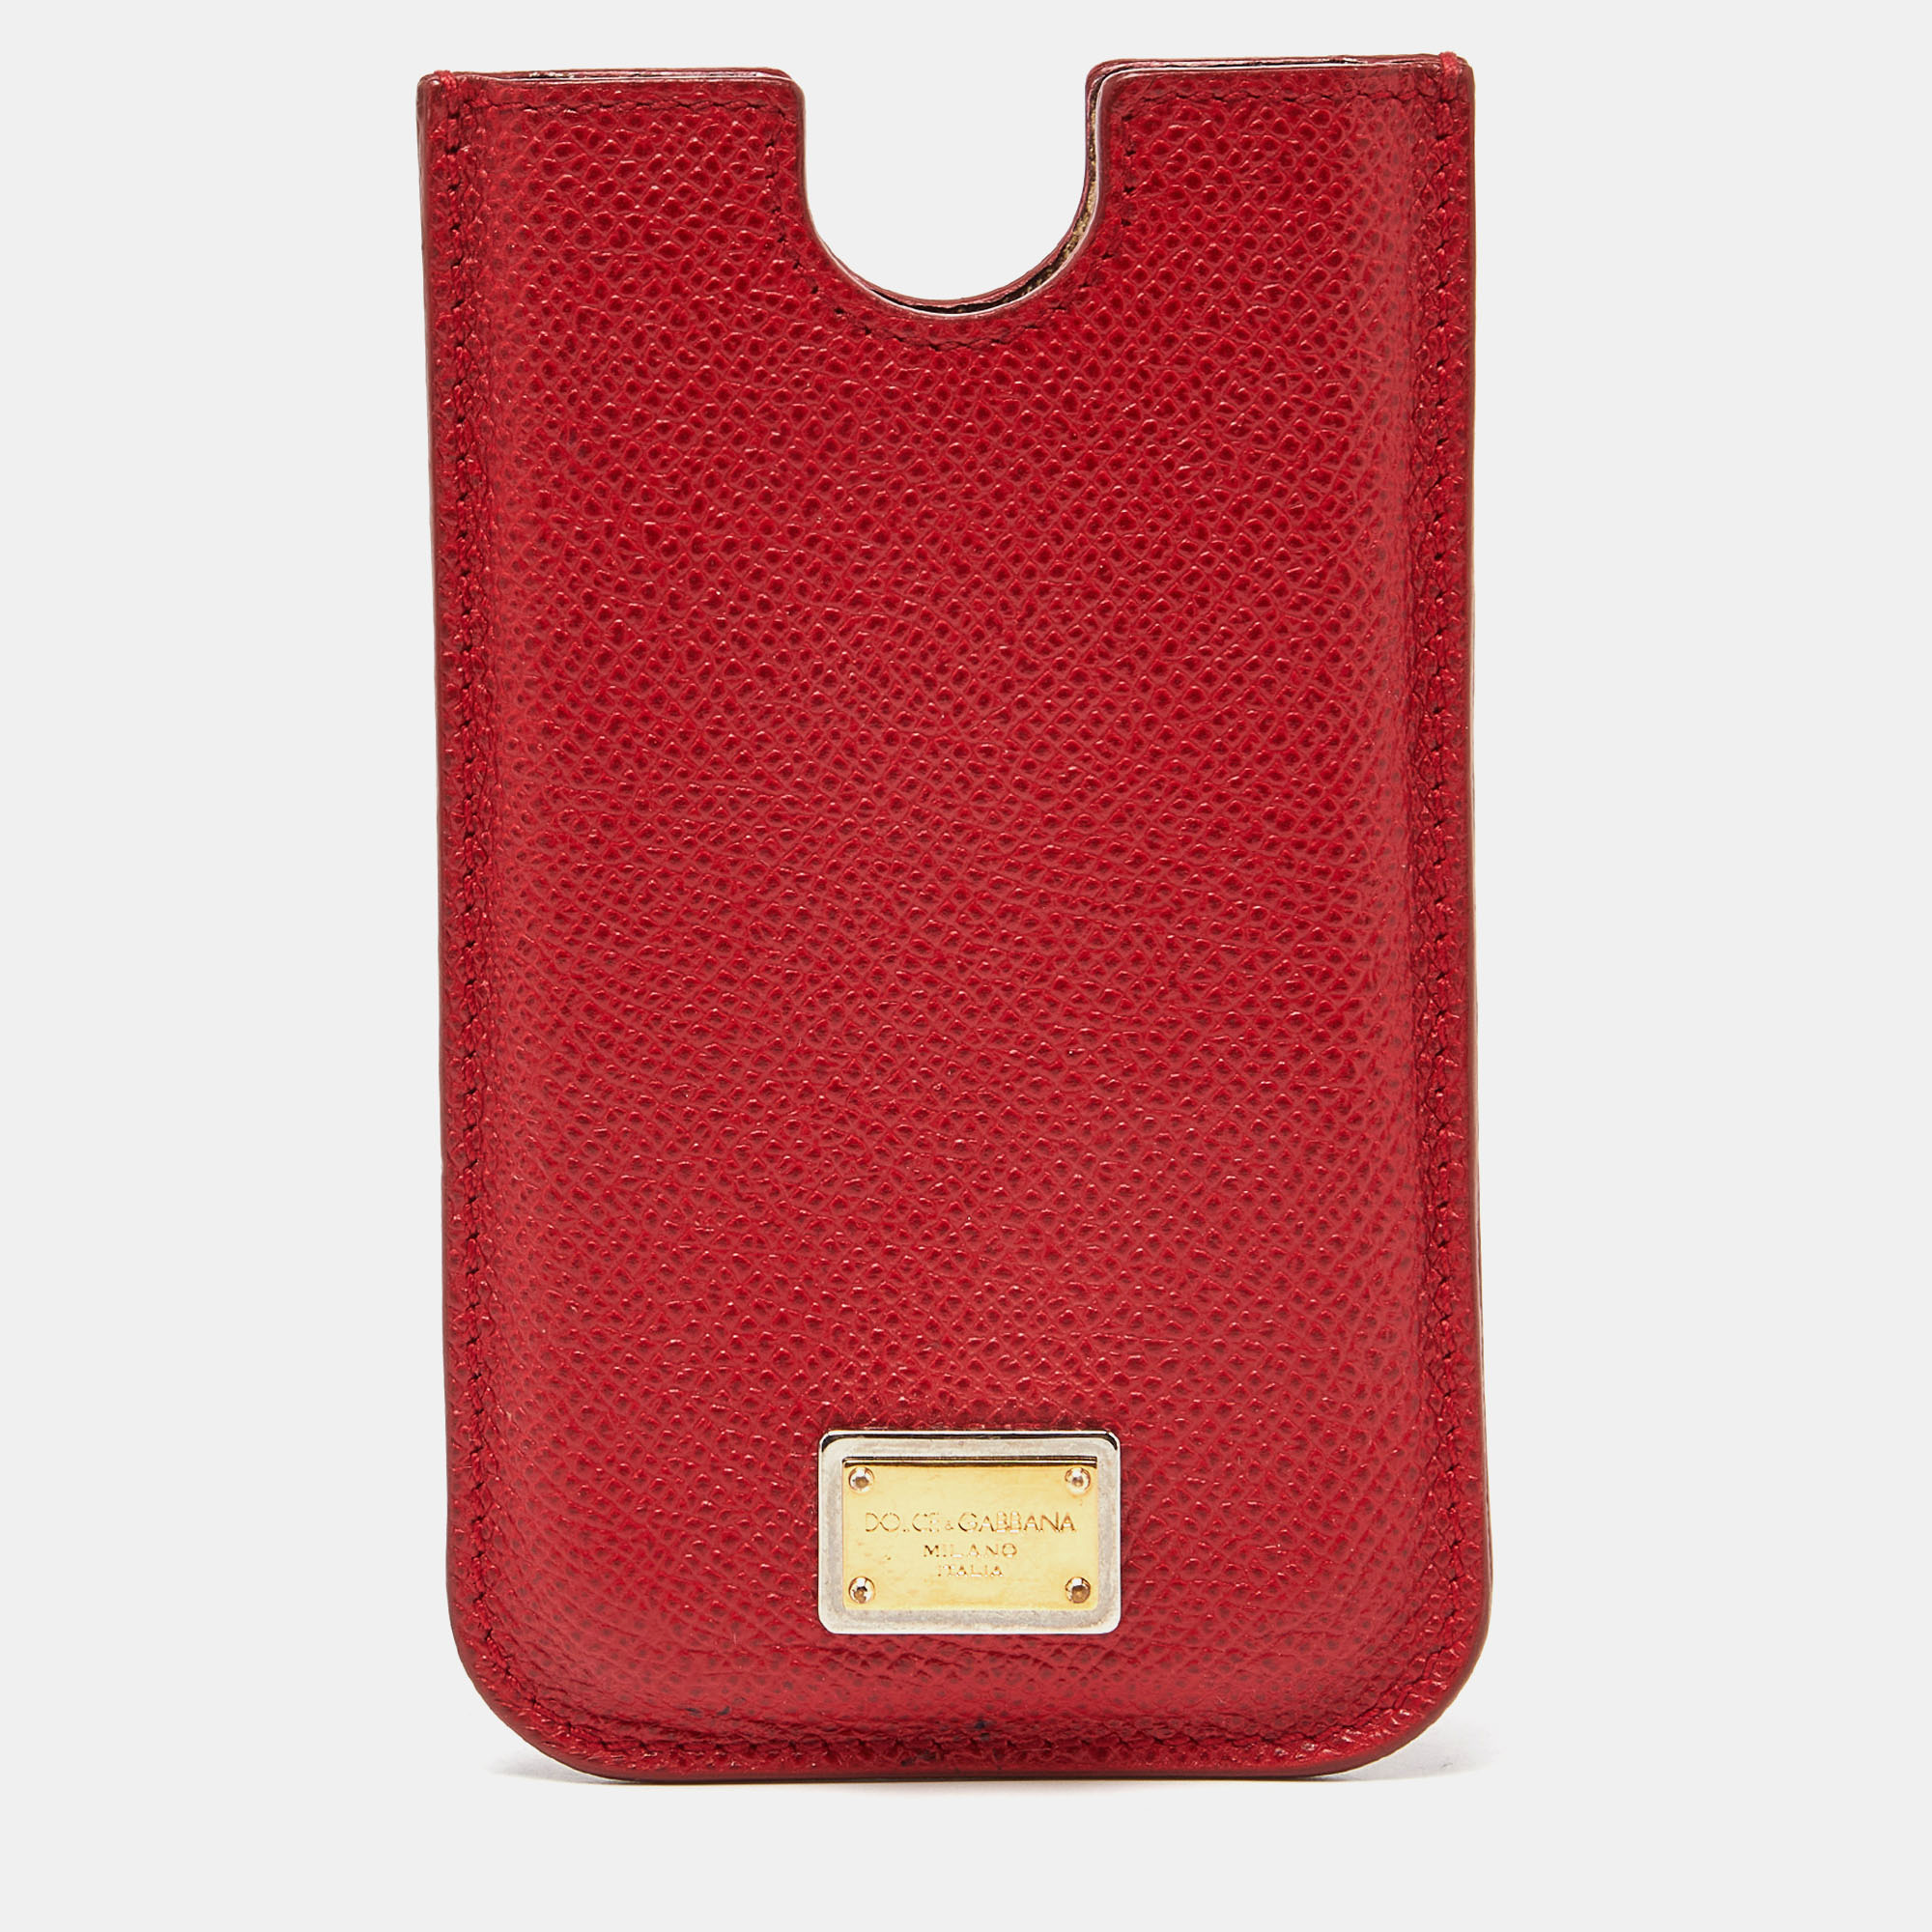 Pre-owned Dolce & Gabbana Red Leather Iphone 4g Case